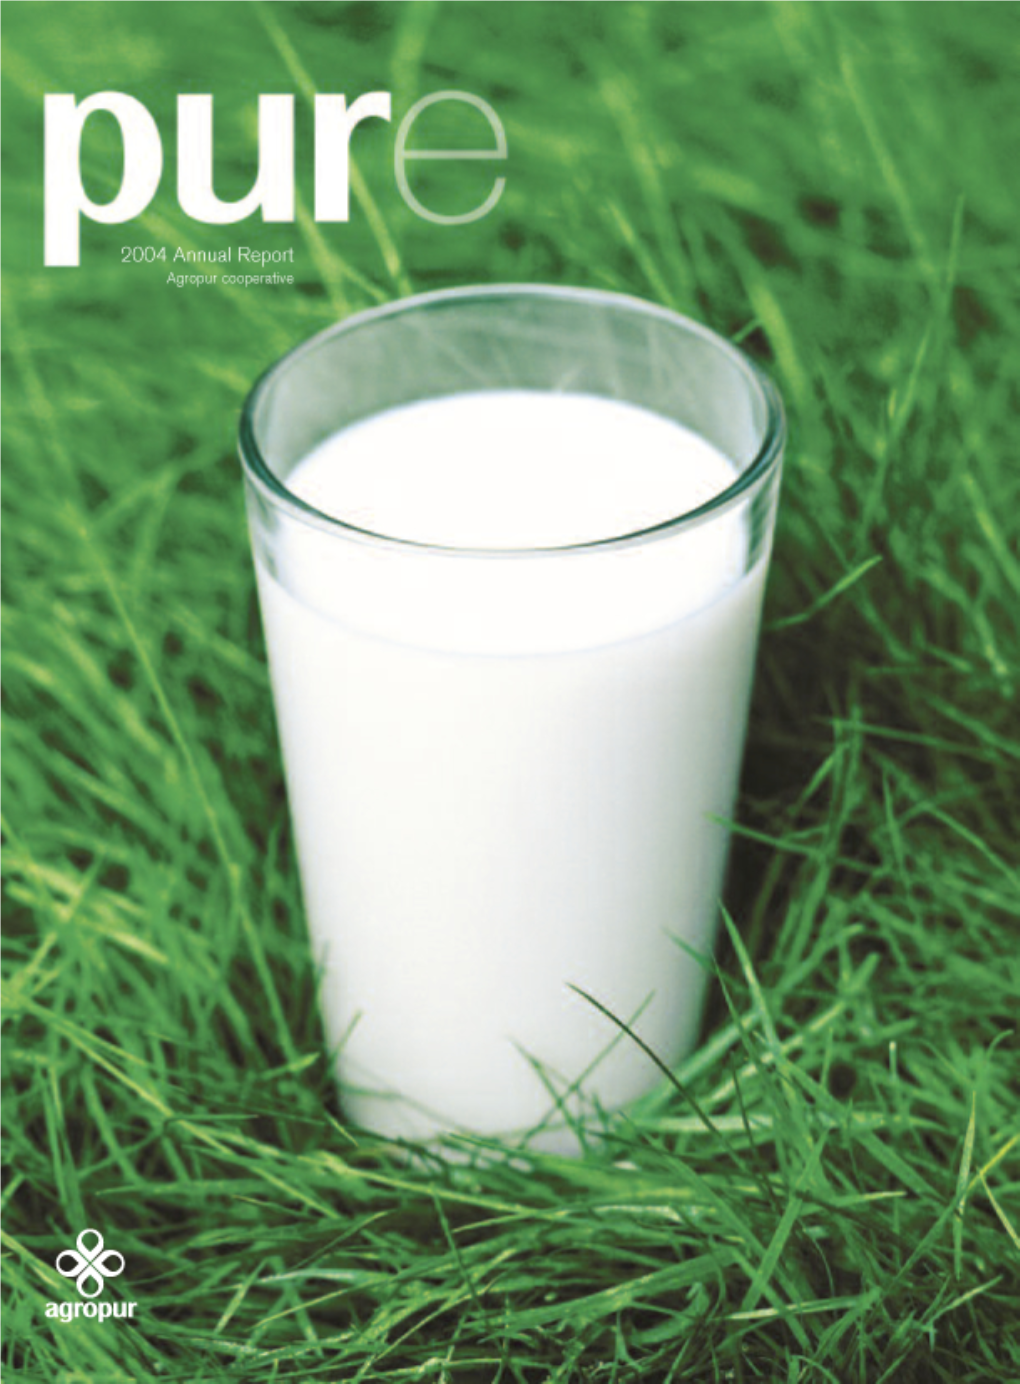 Enhancing the Value of Milk